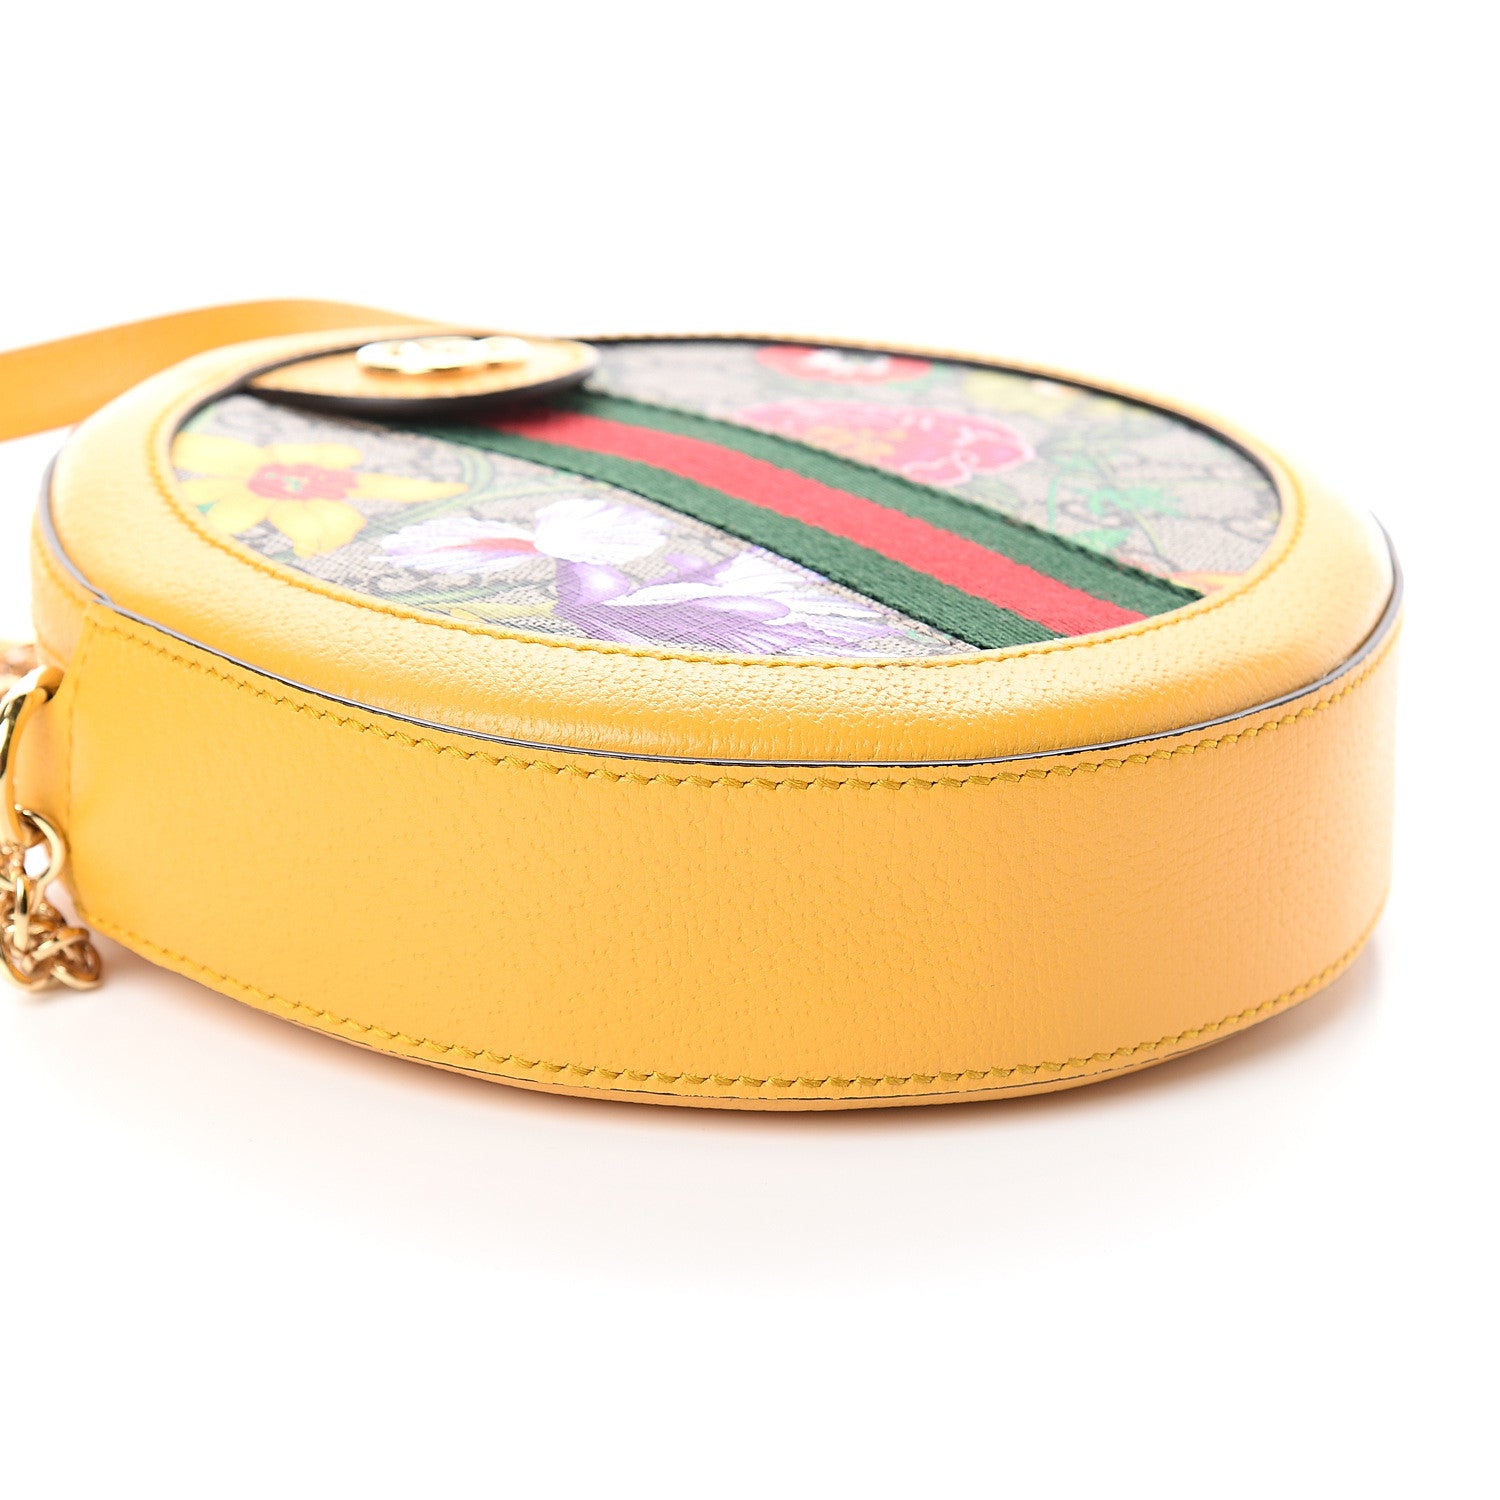 A Gucci Ophidia Round Coin Purse GG Coated Canvas 